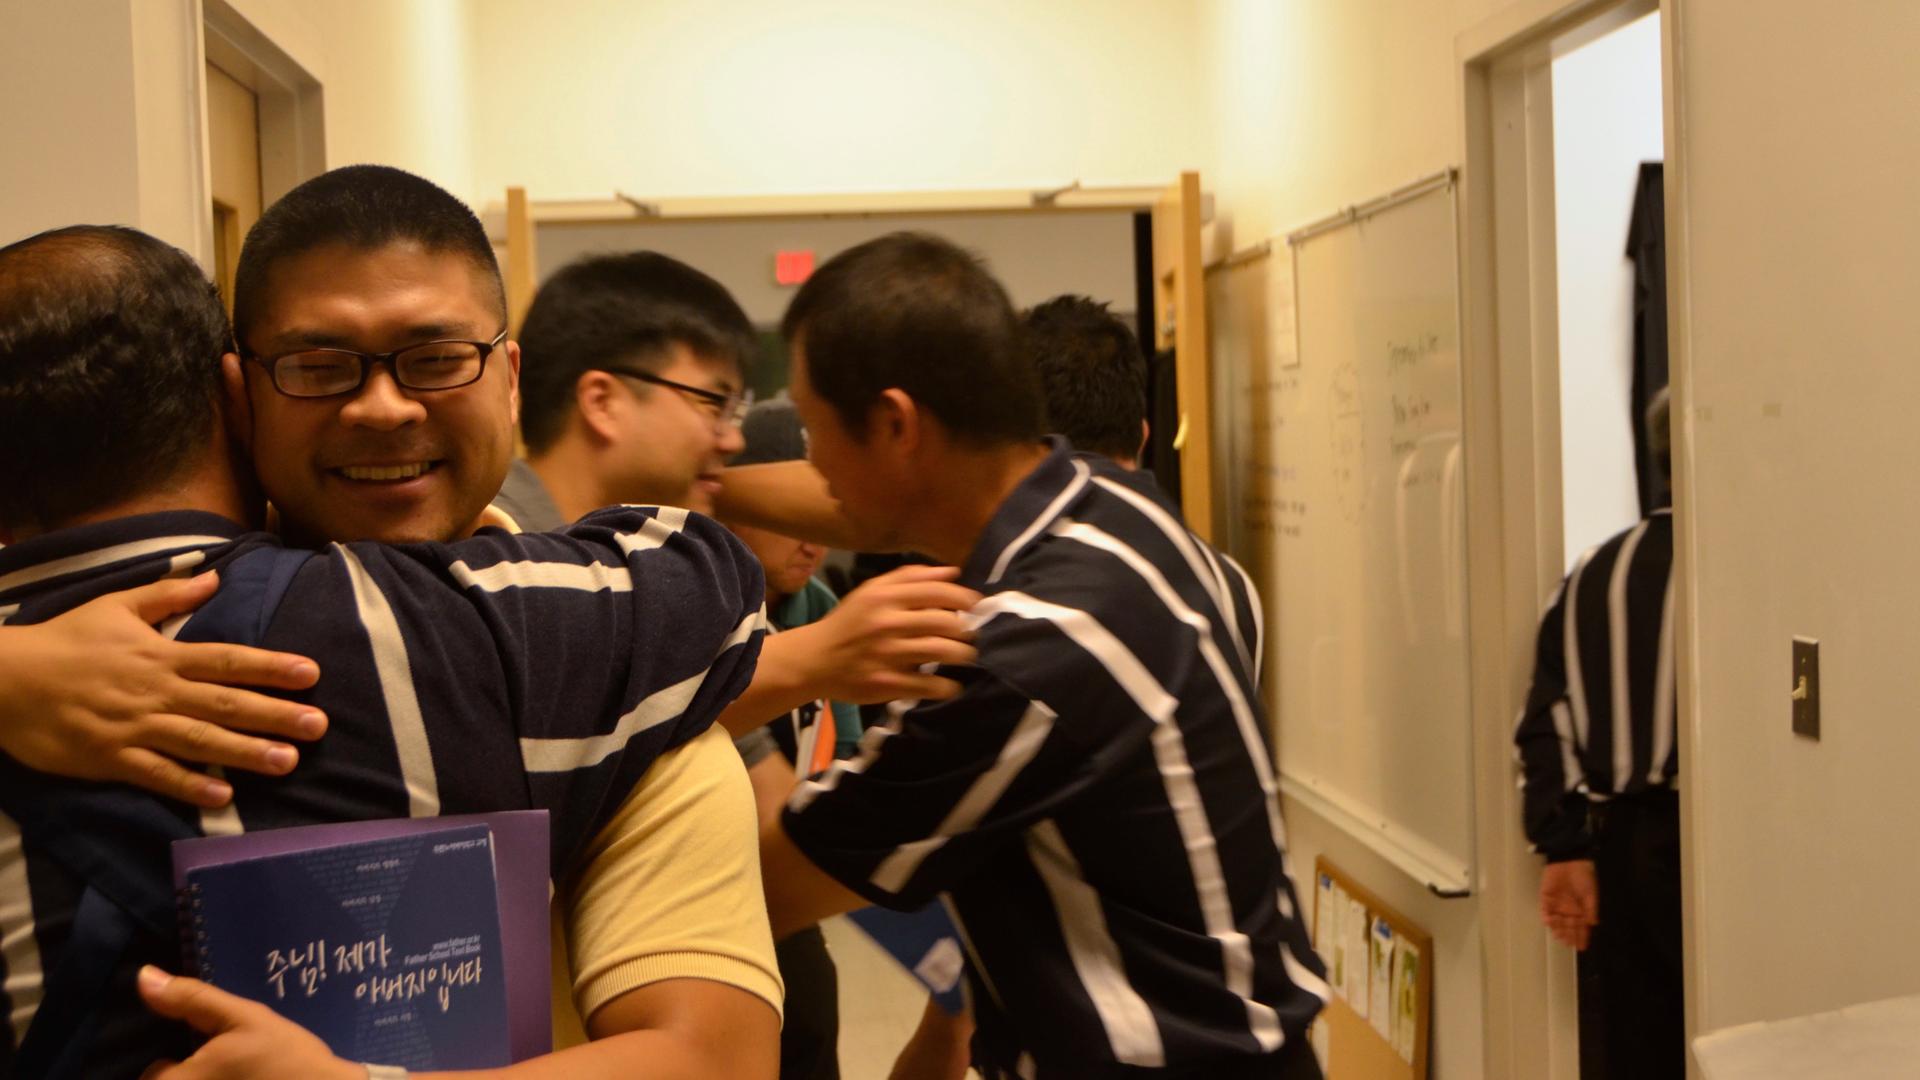 The Durano Father School teaches stoic Korean dads how to be more involved and loving parents.  The program includes a literal lesson on how to hug.